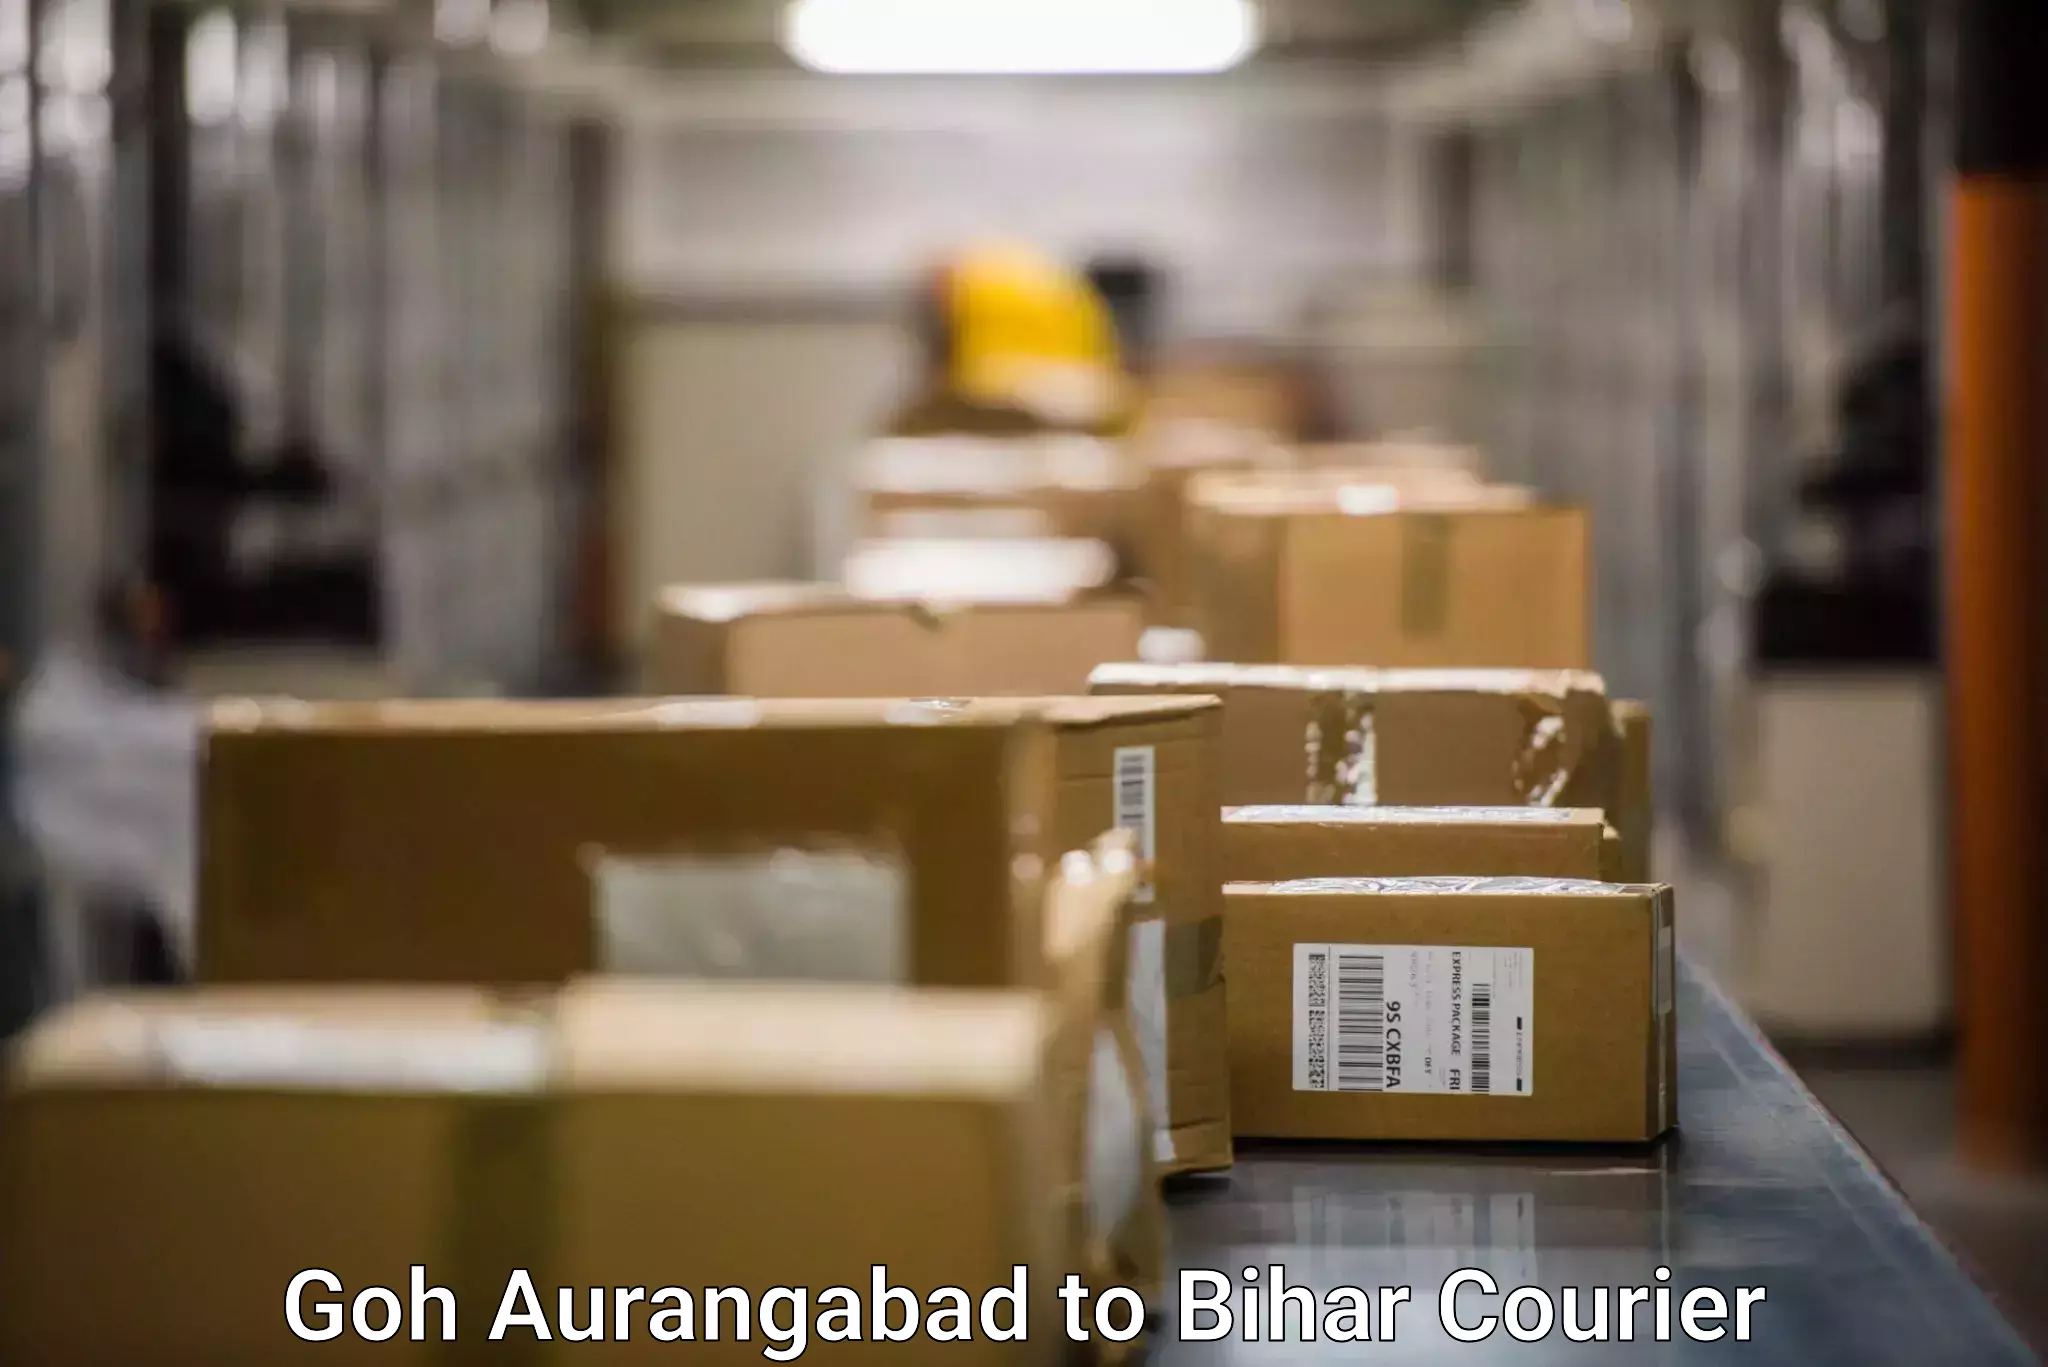 State-of-the-art courier technology in Goh Aurangabad to Forbesganj